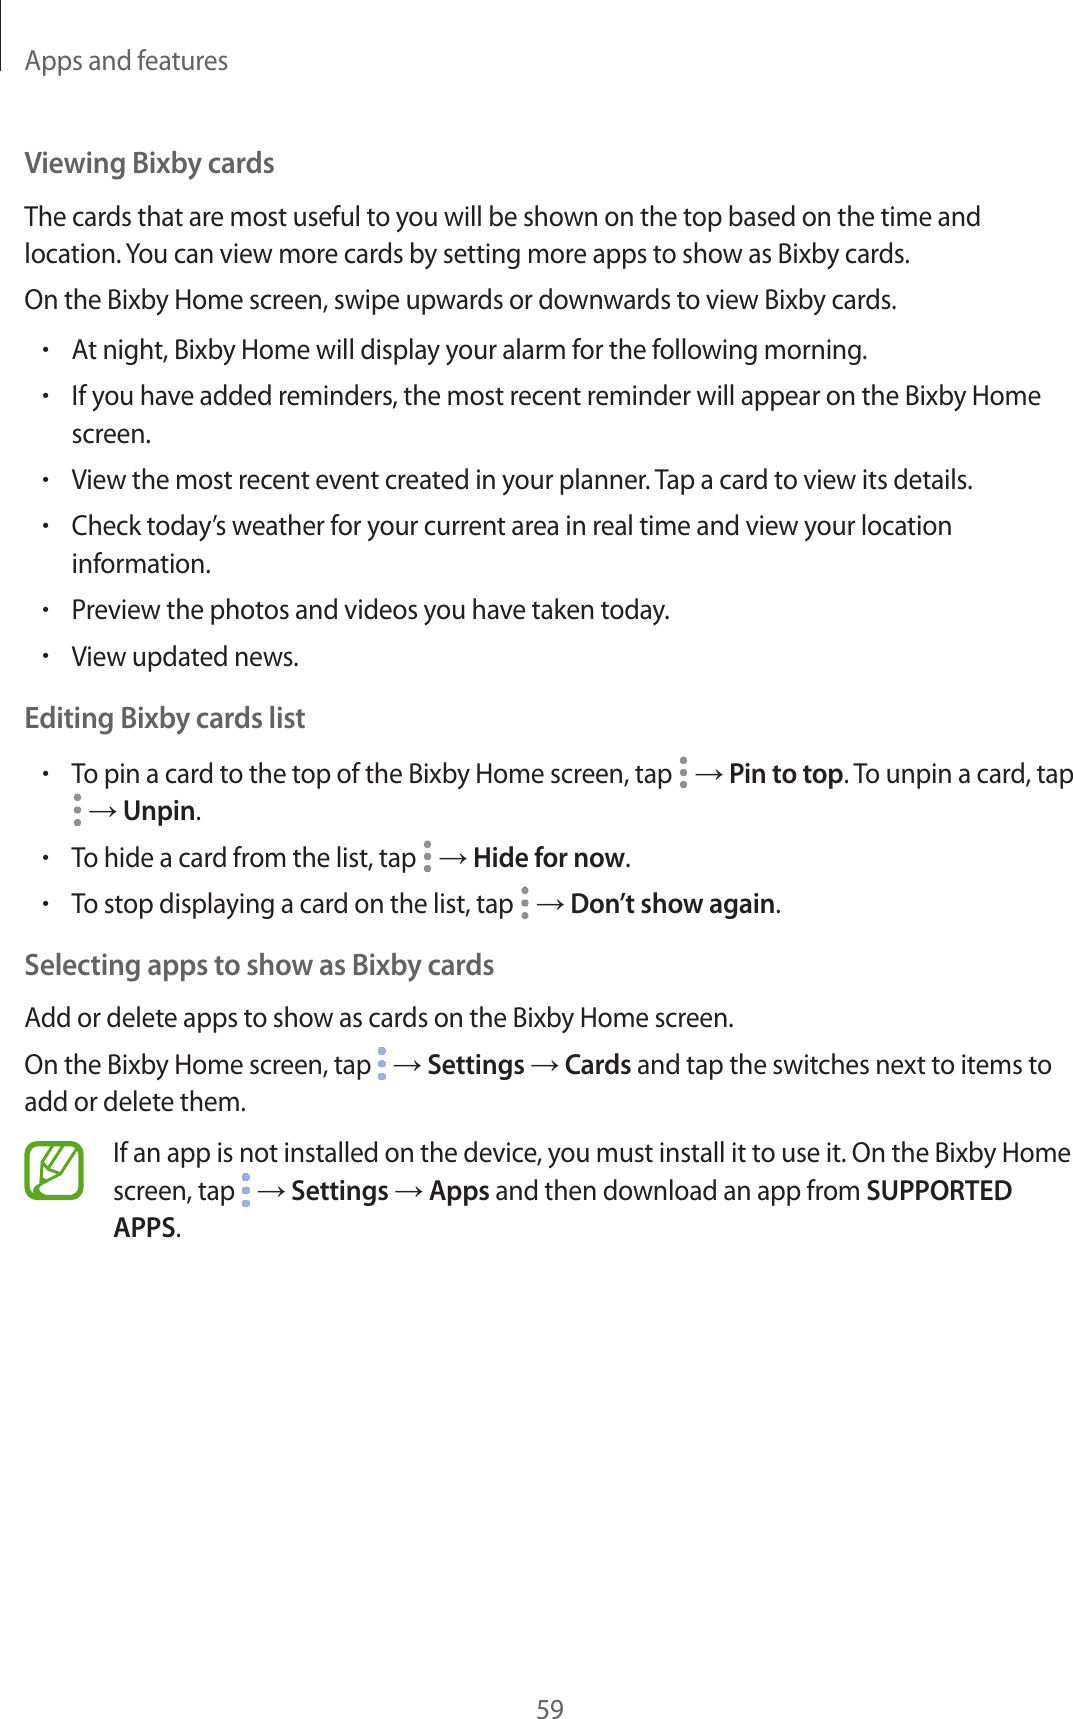 Apps and features59Viewing Bixby cardsThe cards that are most useful to you will be shown on the top based on the time and location. You can view more cards by setting more apps to show as Bixby cards.On the Bixby Home screen, swipe upwards or downwards to view Bixby cards.•At night, Bixby Home will display your alarm for the following morning.•If you have added reminders, the most recent reminder will appear on the Bixby Home screen.•View the most recent event created in your planner. Tap a card to view its details.•Check today’s weather for your current area in real time and view your location information.•Preview the photos and videos you have taken today.•View updated news.Editing Bixby cards list•To pin a card to the top of the Bixby Home screen, tap   → Pin to top. To unpin a card, tap  → Unpin.•To hide a card from the list, tap   → Hide for now.•To stop displaying a card on the list, tap   → Don’t show again.Selecting apps to show as Bixby cardsAdd or delete apps to show as cards on the Bixby Home screen.On the Bixby Home screen, tap   → Settings → Cards and tap the switches next to items to add or delete them.If an app is not installed on the device, you must install it to use it. On the Bixby Home screen, tap   → Settings → Apps and then download an app from SUPPORTED APPS.